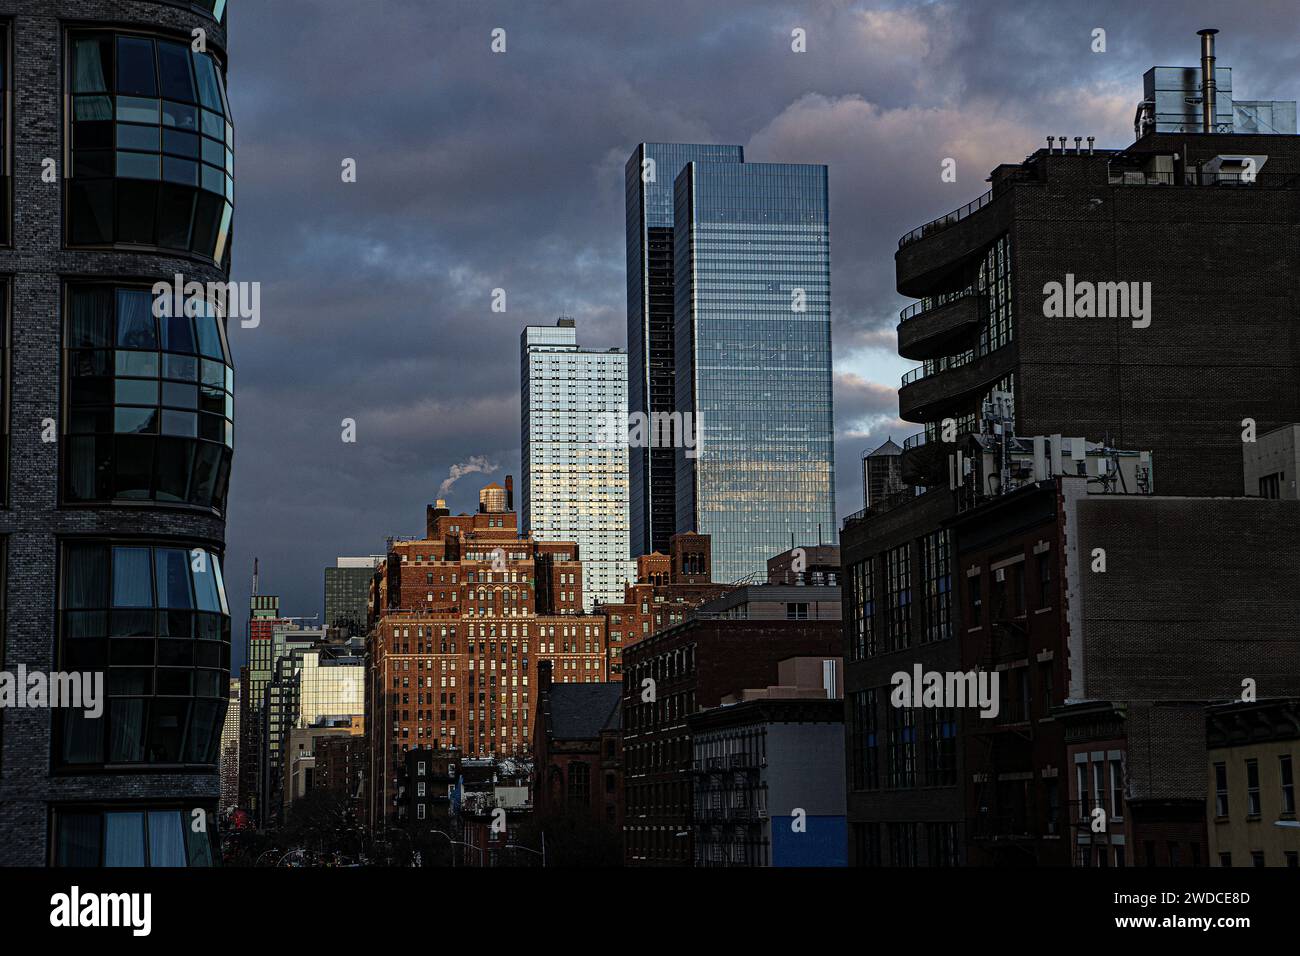 Cityscape with dramatic sky, view looking north from Chelsea neighborhood, New York City, New York, USA Stock Photo